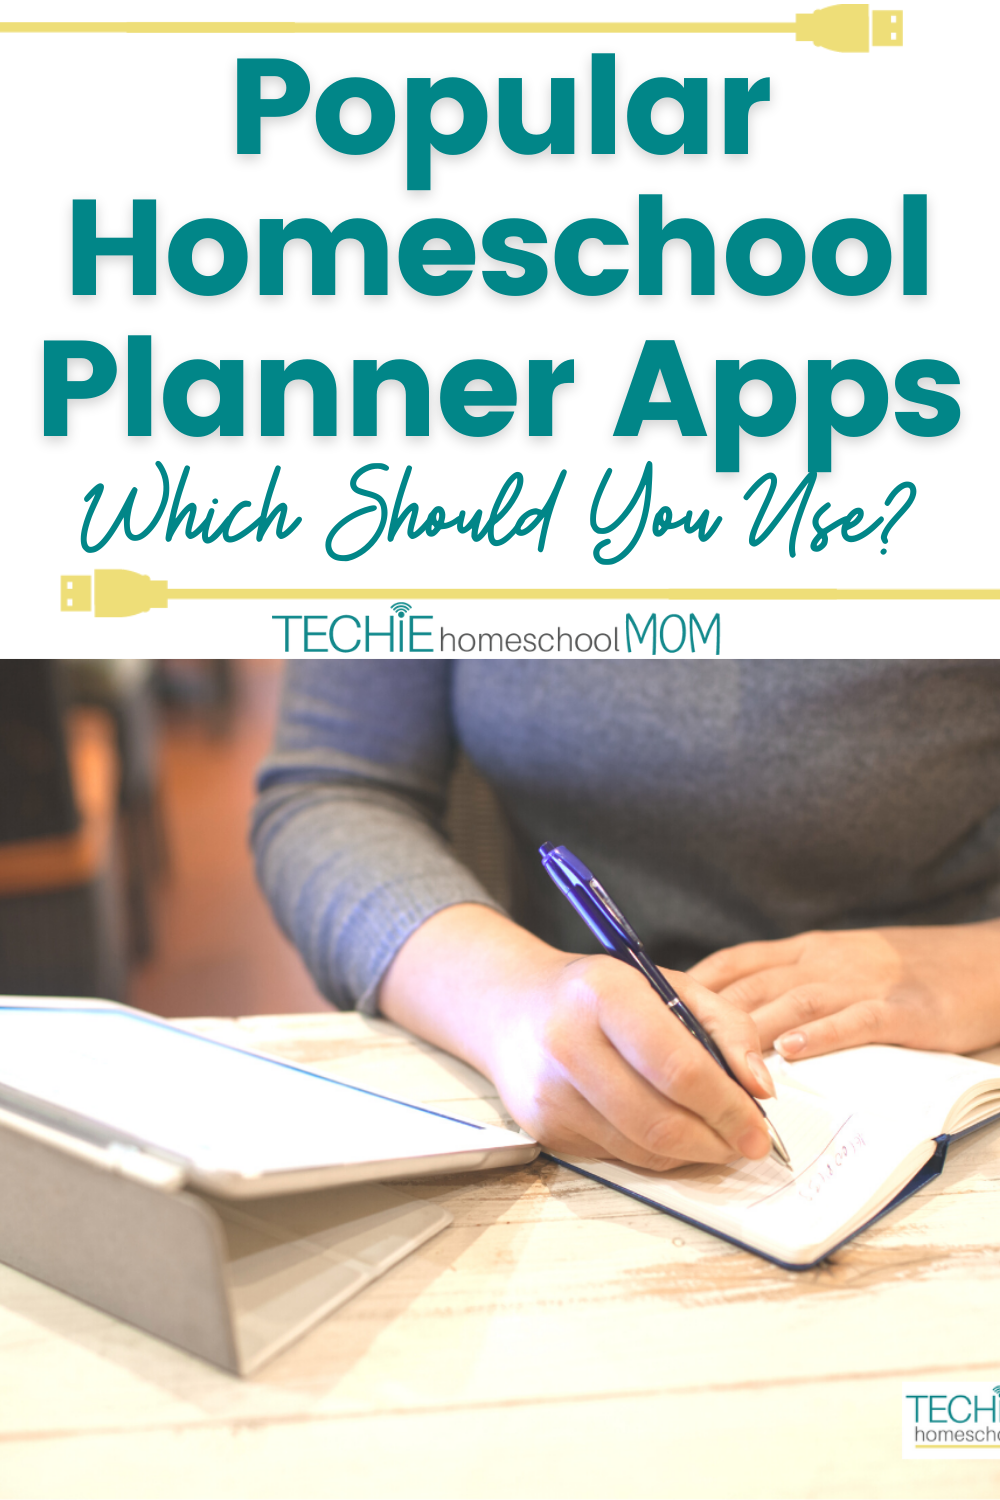 Online homeschool planner apps have lots of great features, but how to do you find the best one for your family? Read these reviews of the most popular ones to decide.